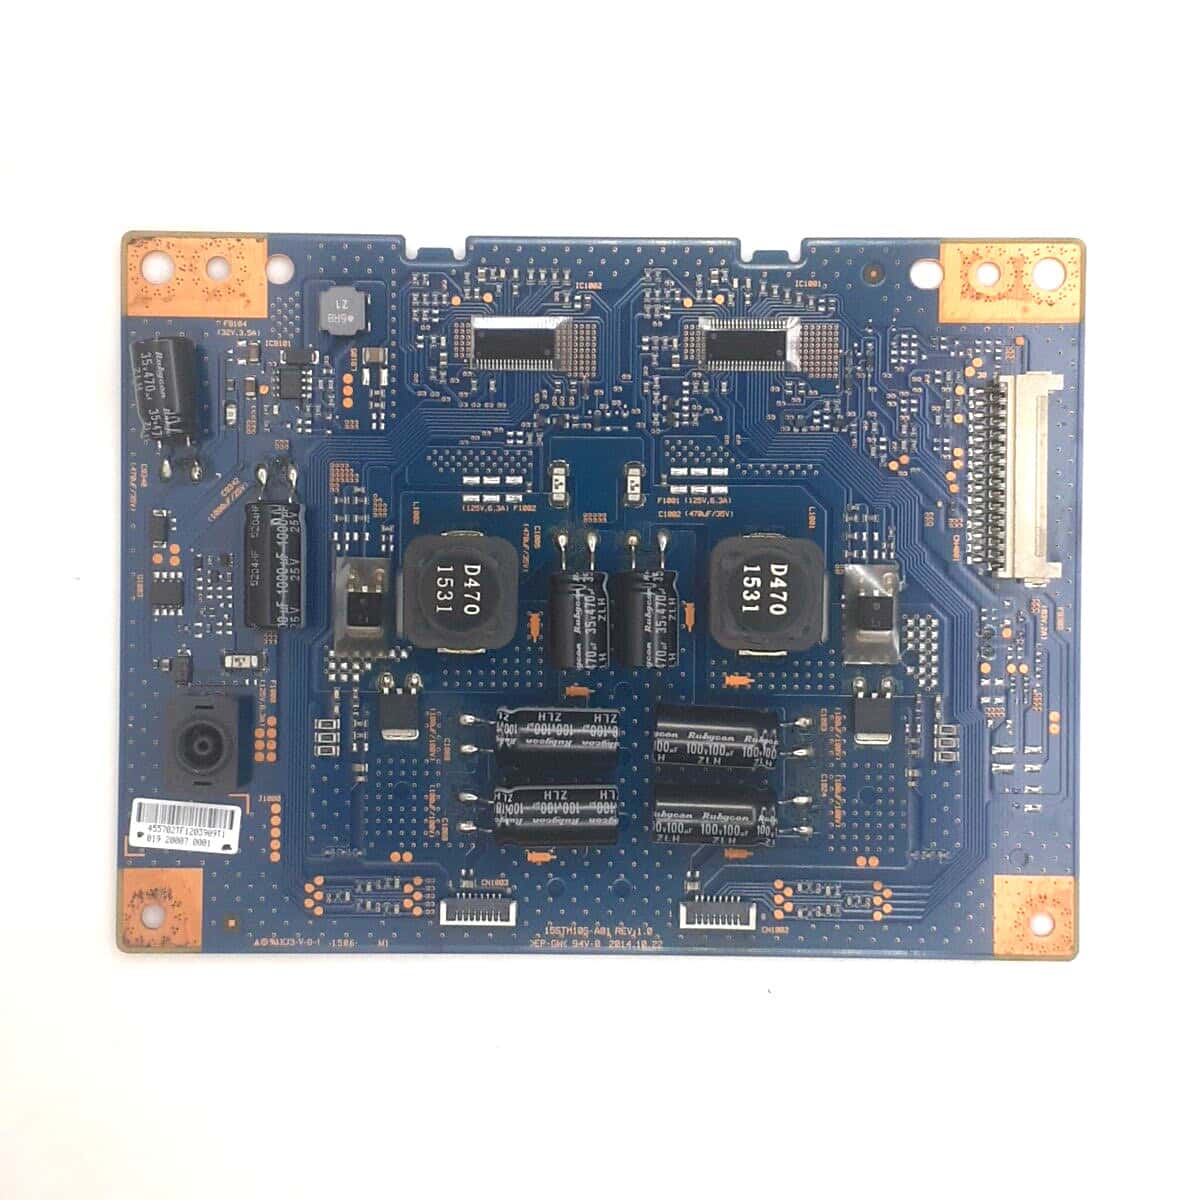 50W950C-SONY-POWER-SUPPLY-BOARD-FOR-LED-TV--rotated copy